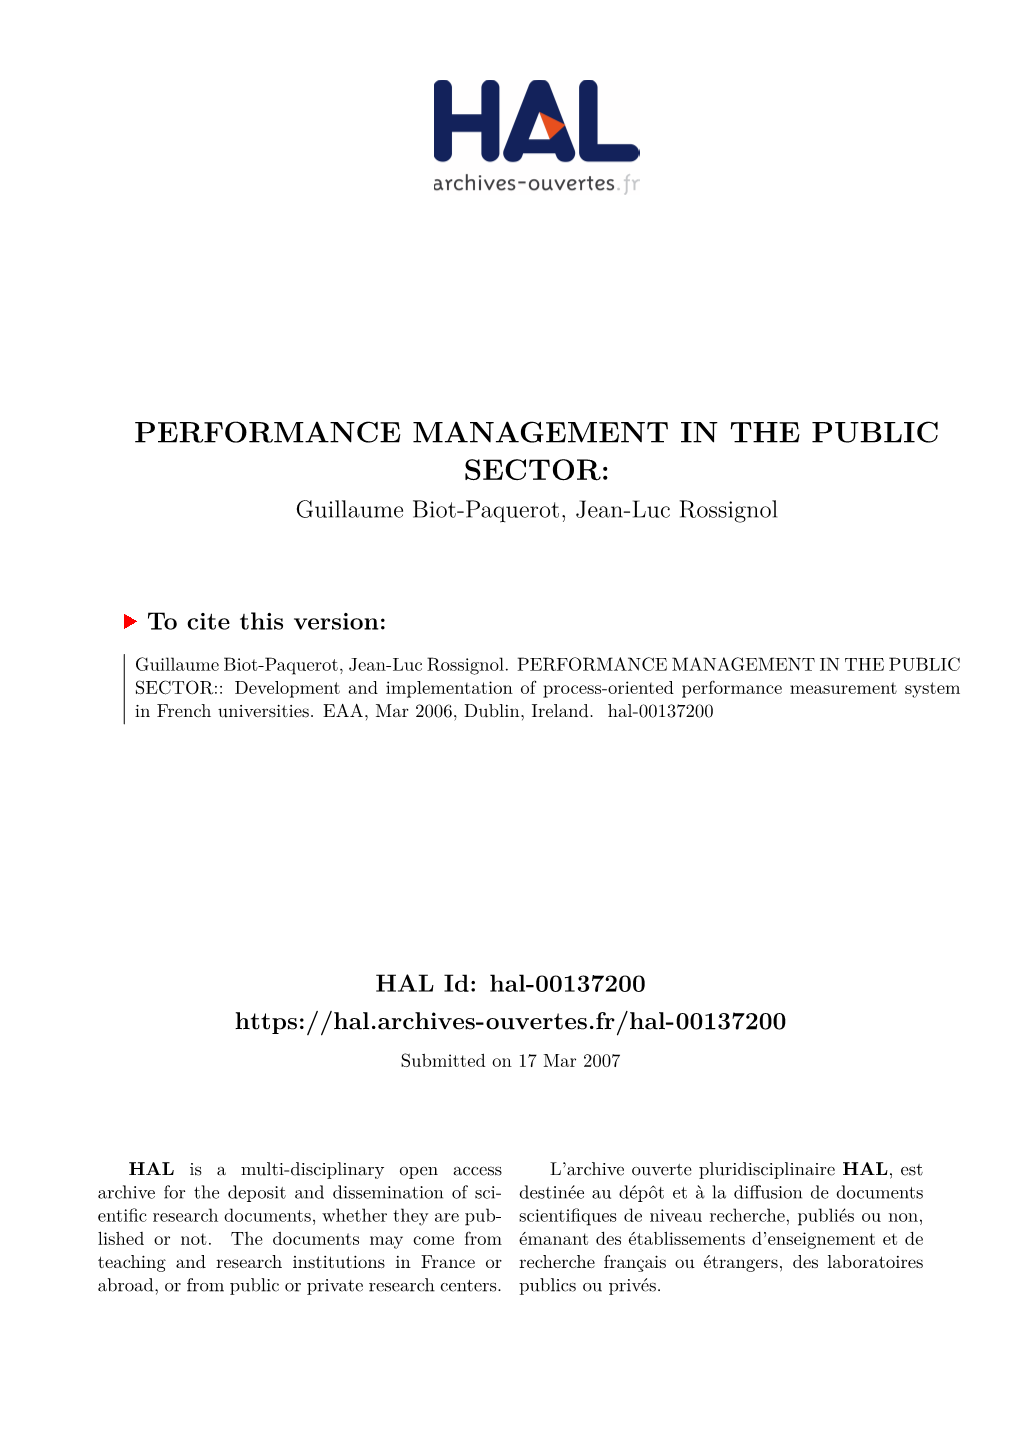 PERFORMANCE MANAGEMENT in the PUBLIC SECTOR: Guillaume Biot-Paquerot, Jean-Luc Rossignol